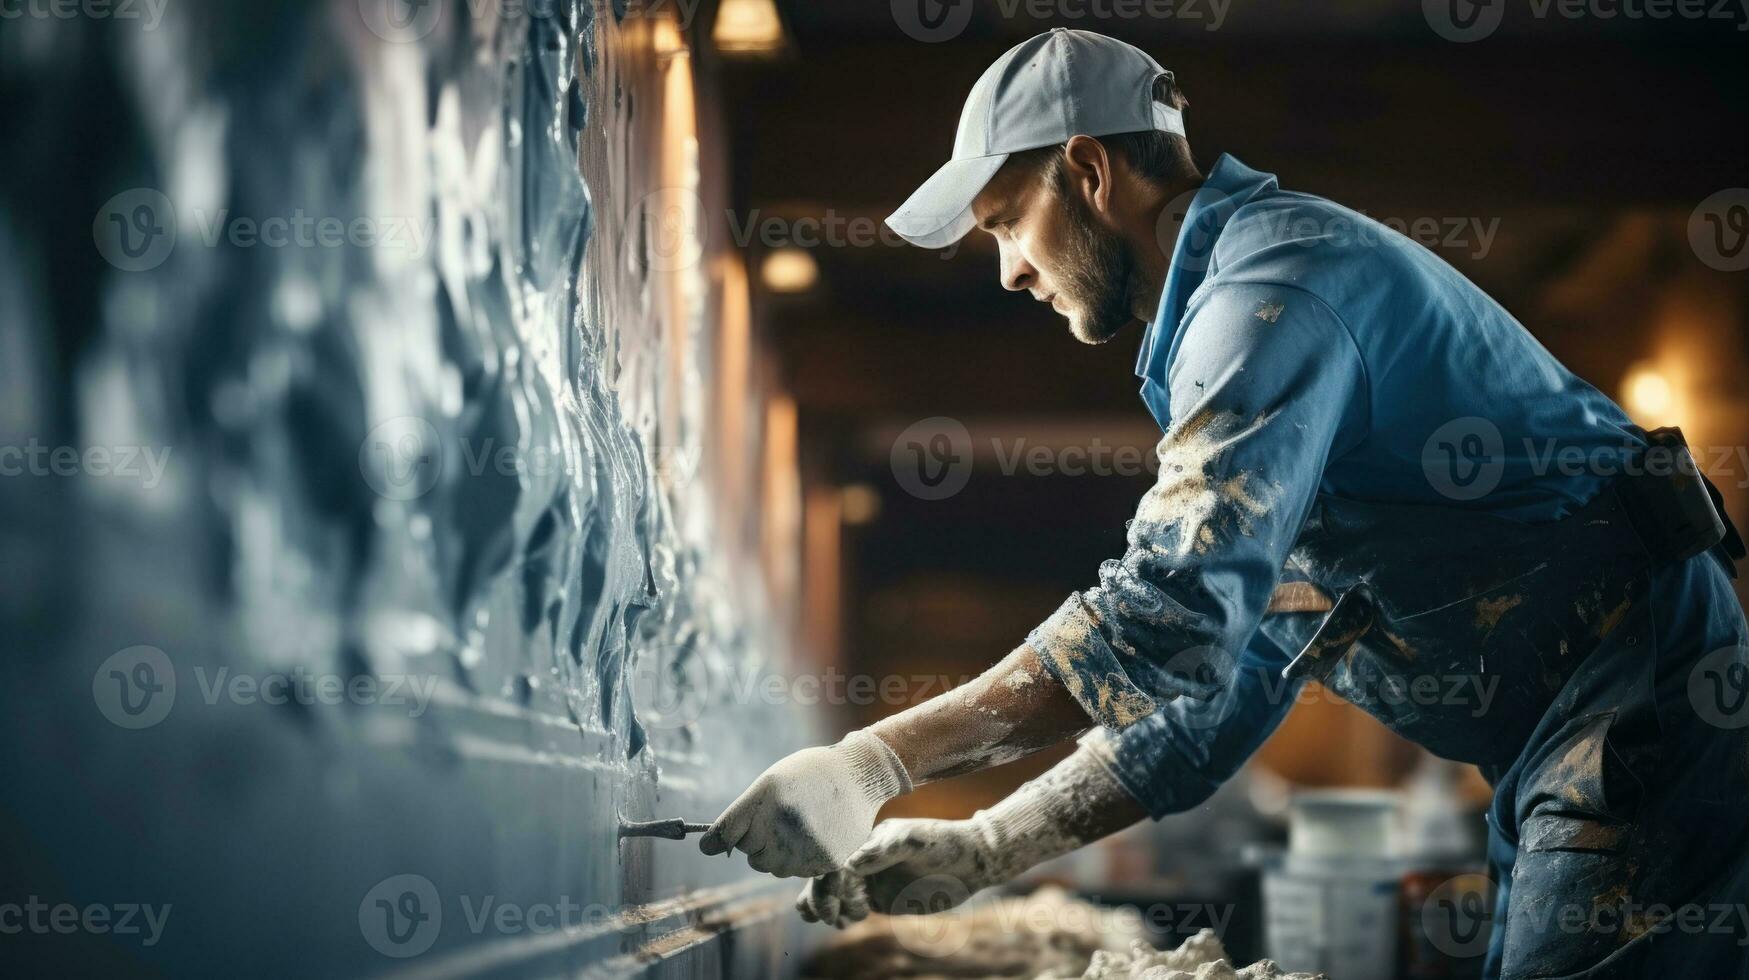 Portrait of a male worker in a blue uniform and a white cap working painter. photo